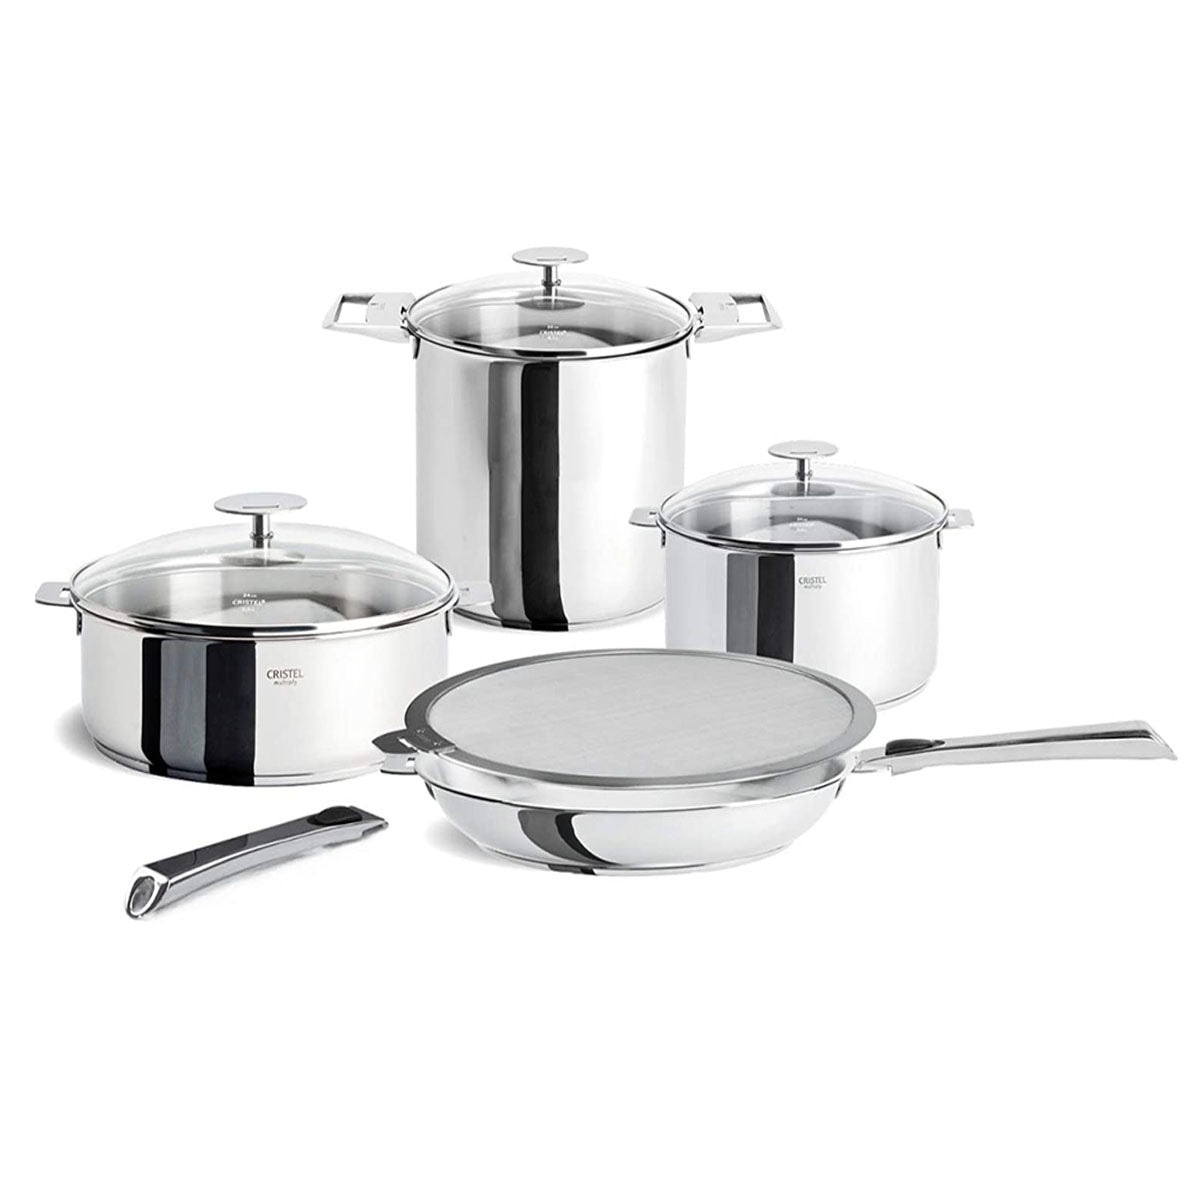 CRISTEL, 18-10 Stainless Steel Set of 12 Piece, 5-Ply construction, Sh